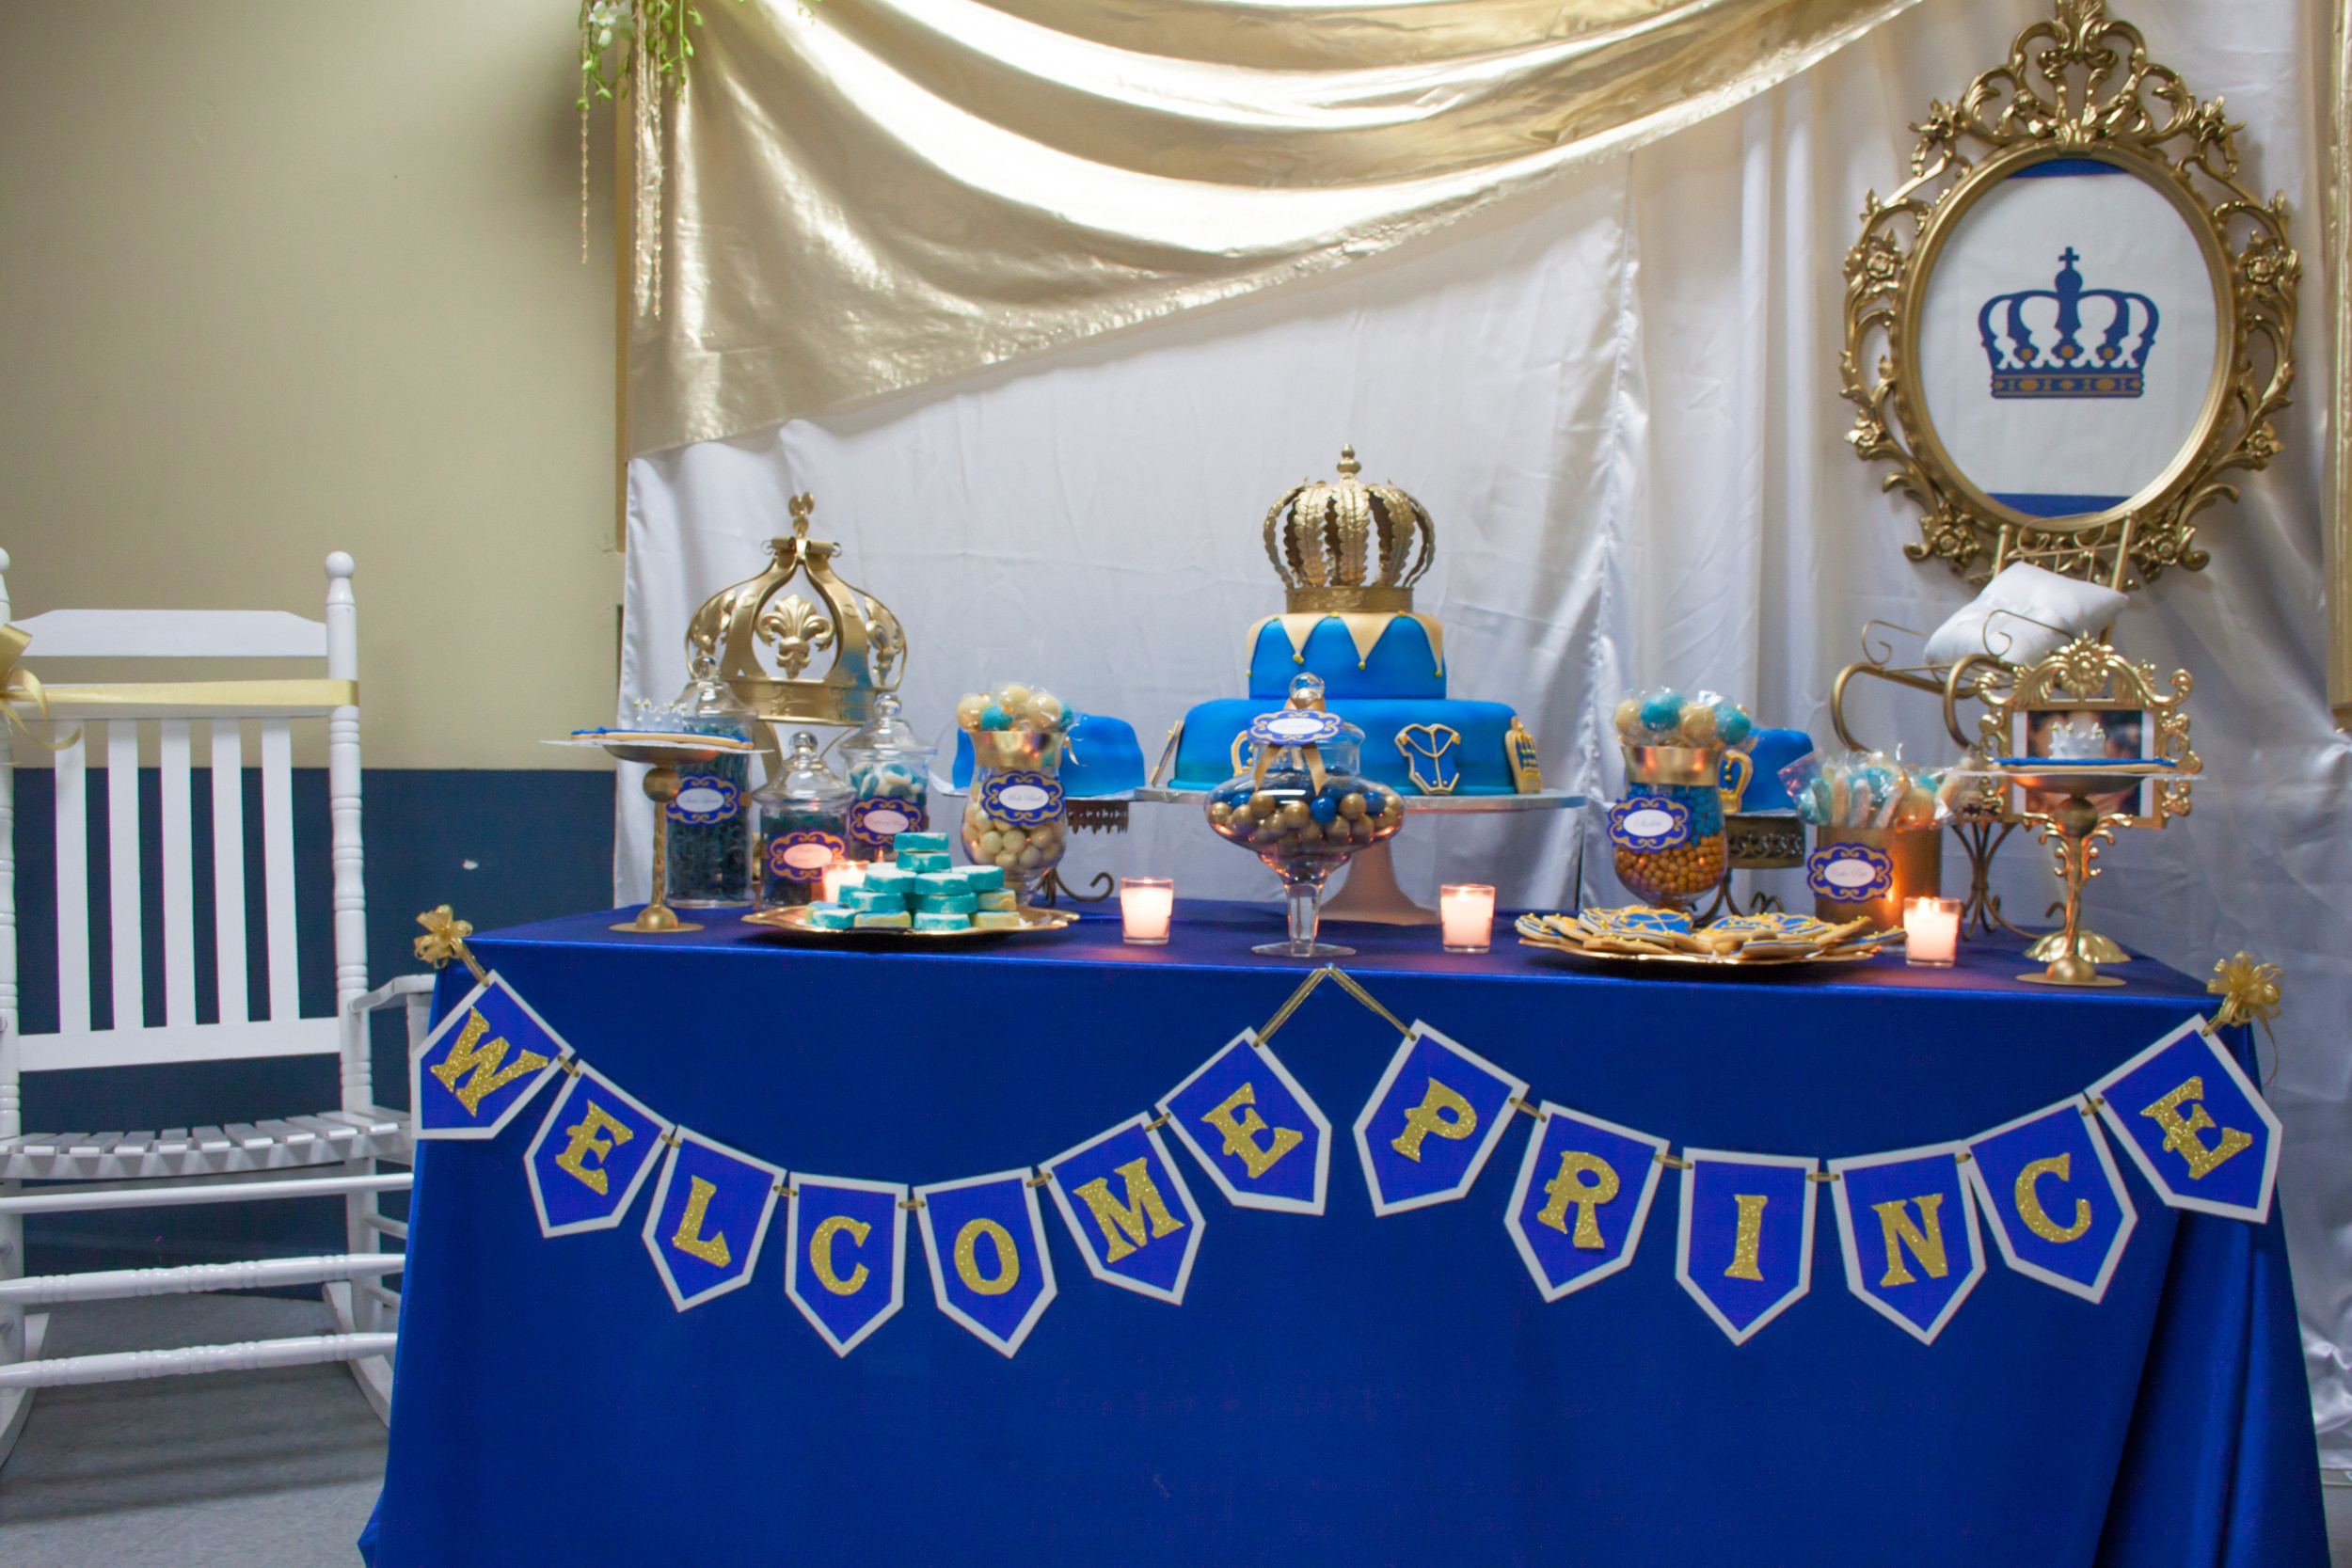 Prince Baby Shower Decoration Ideas
 Wel e Royal Prince Baby Shower